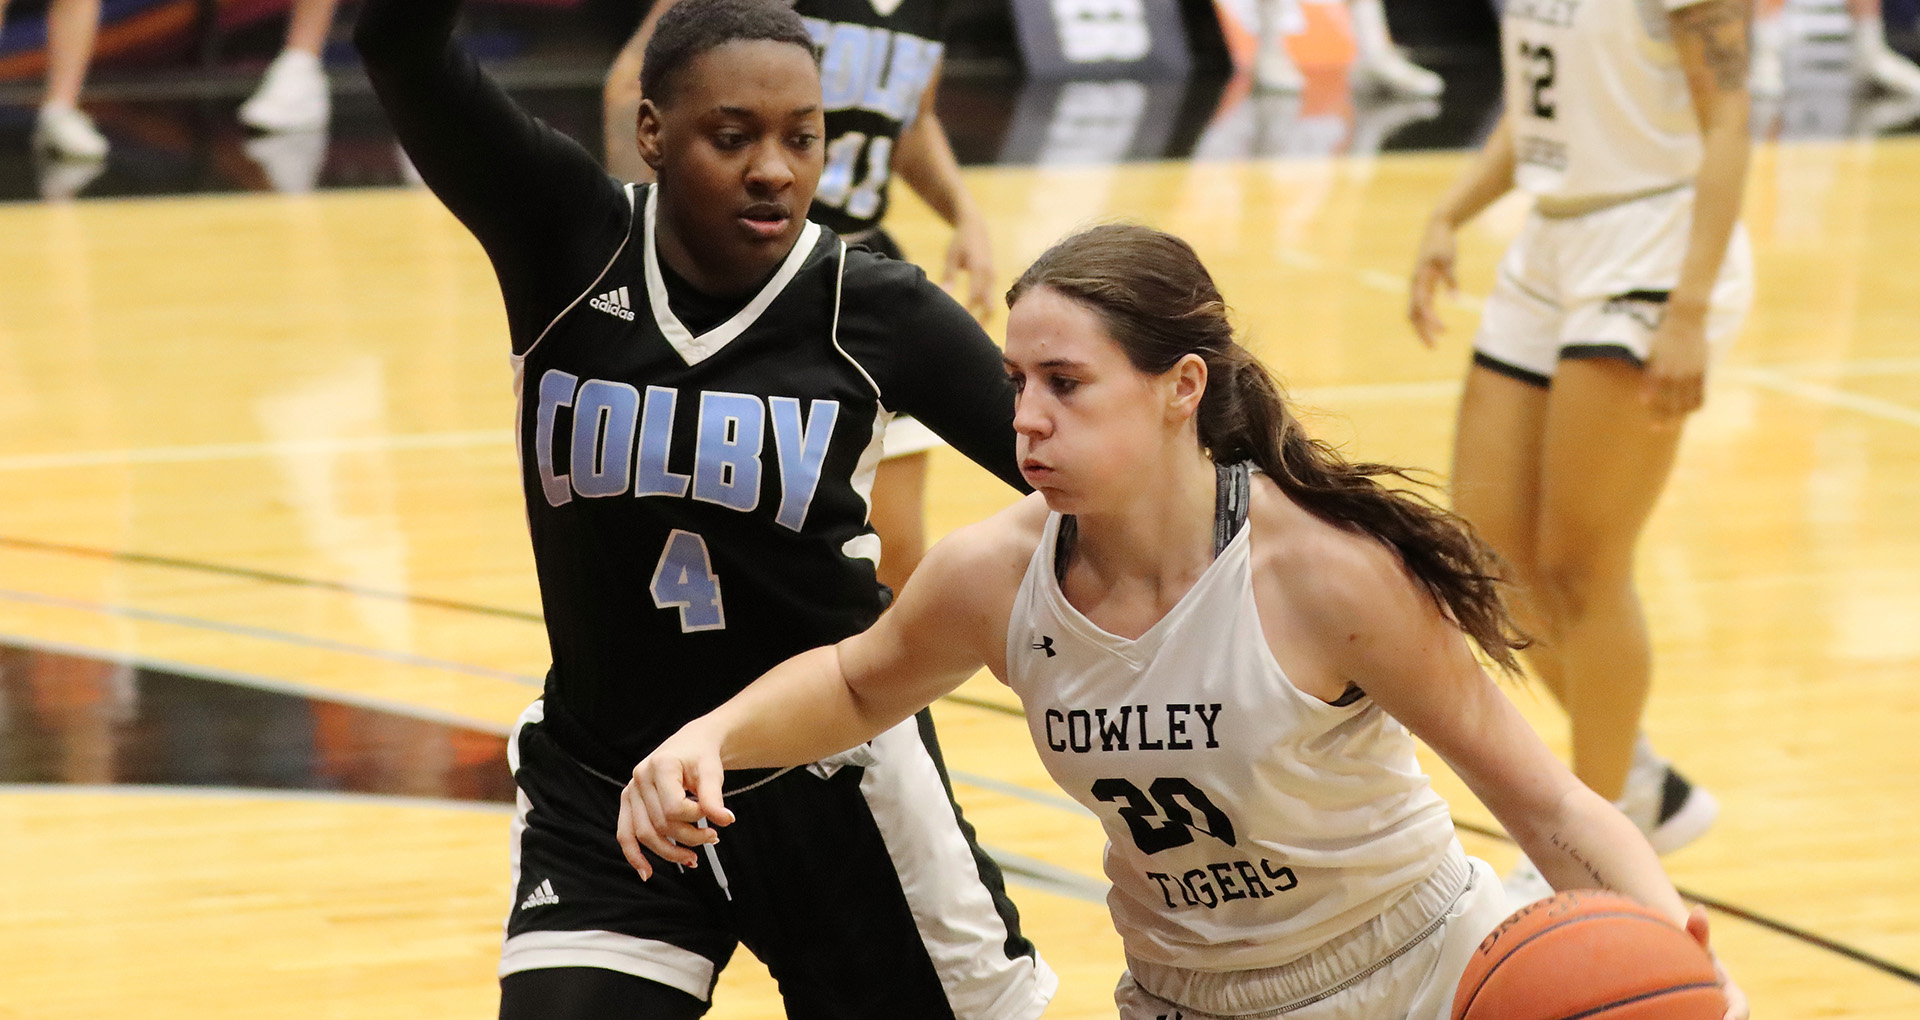 Lady Tigers blast Colby 91-70, move over .500